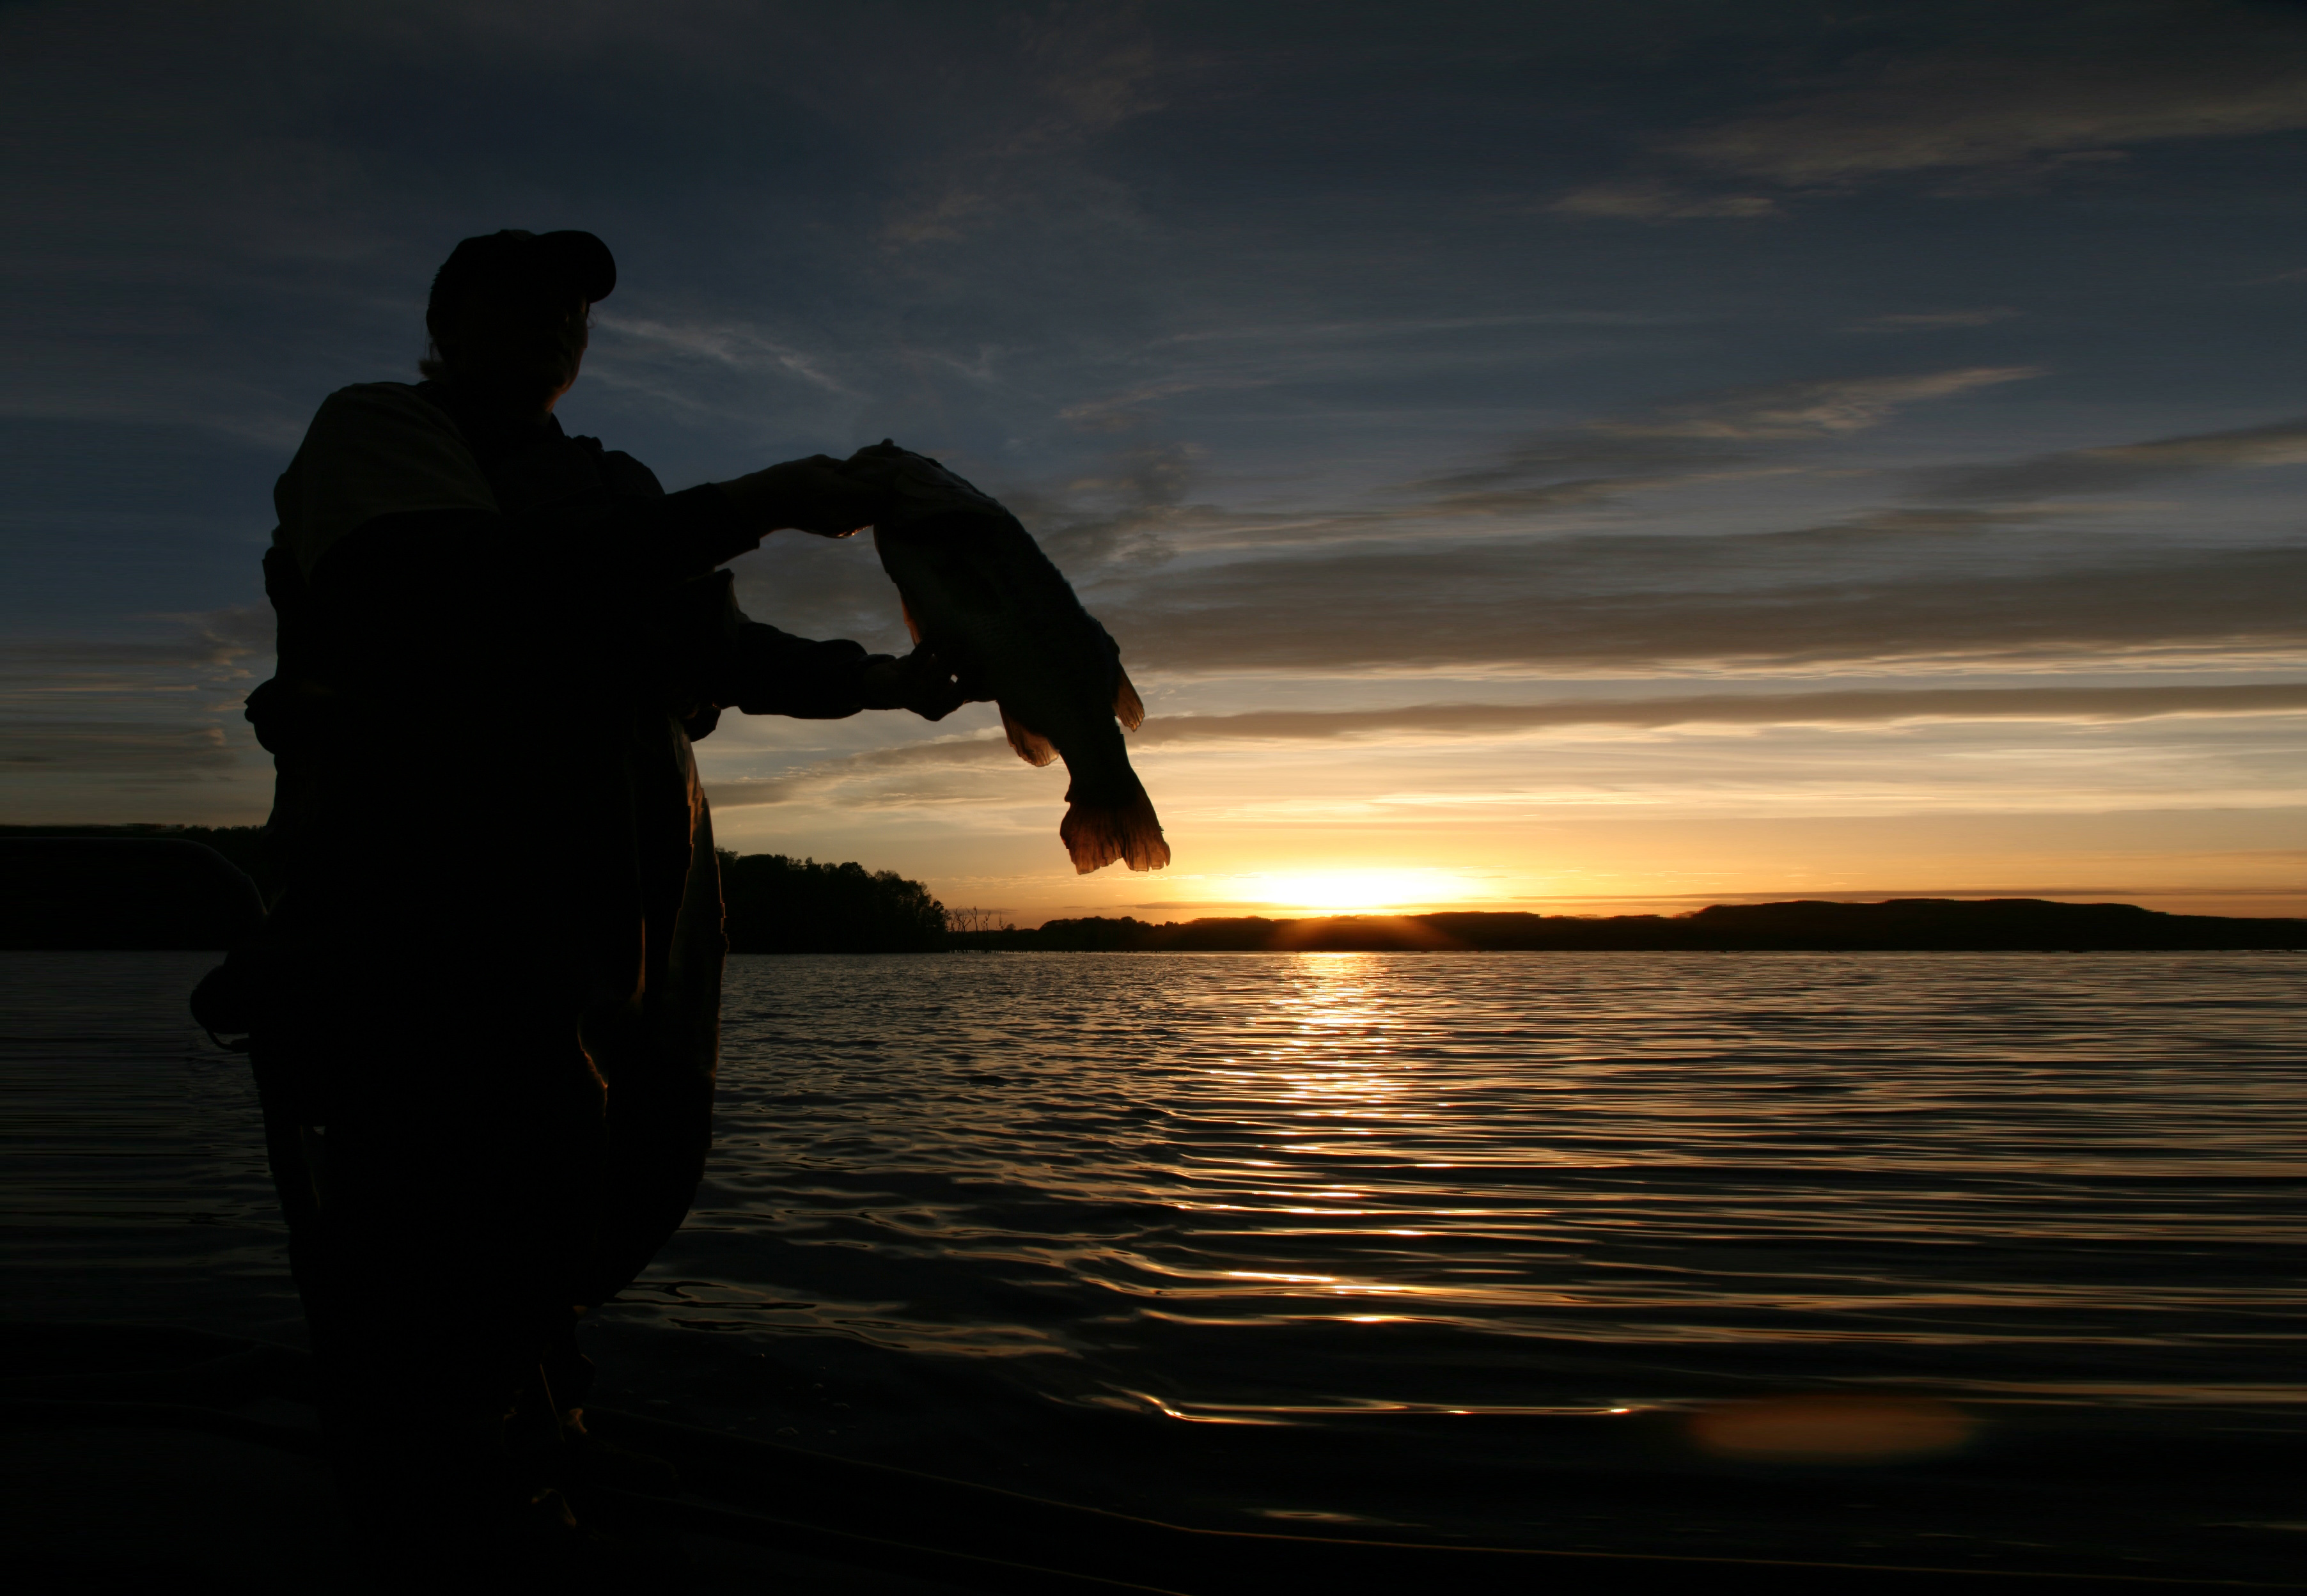 A person is holding a fish in a sunset